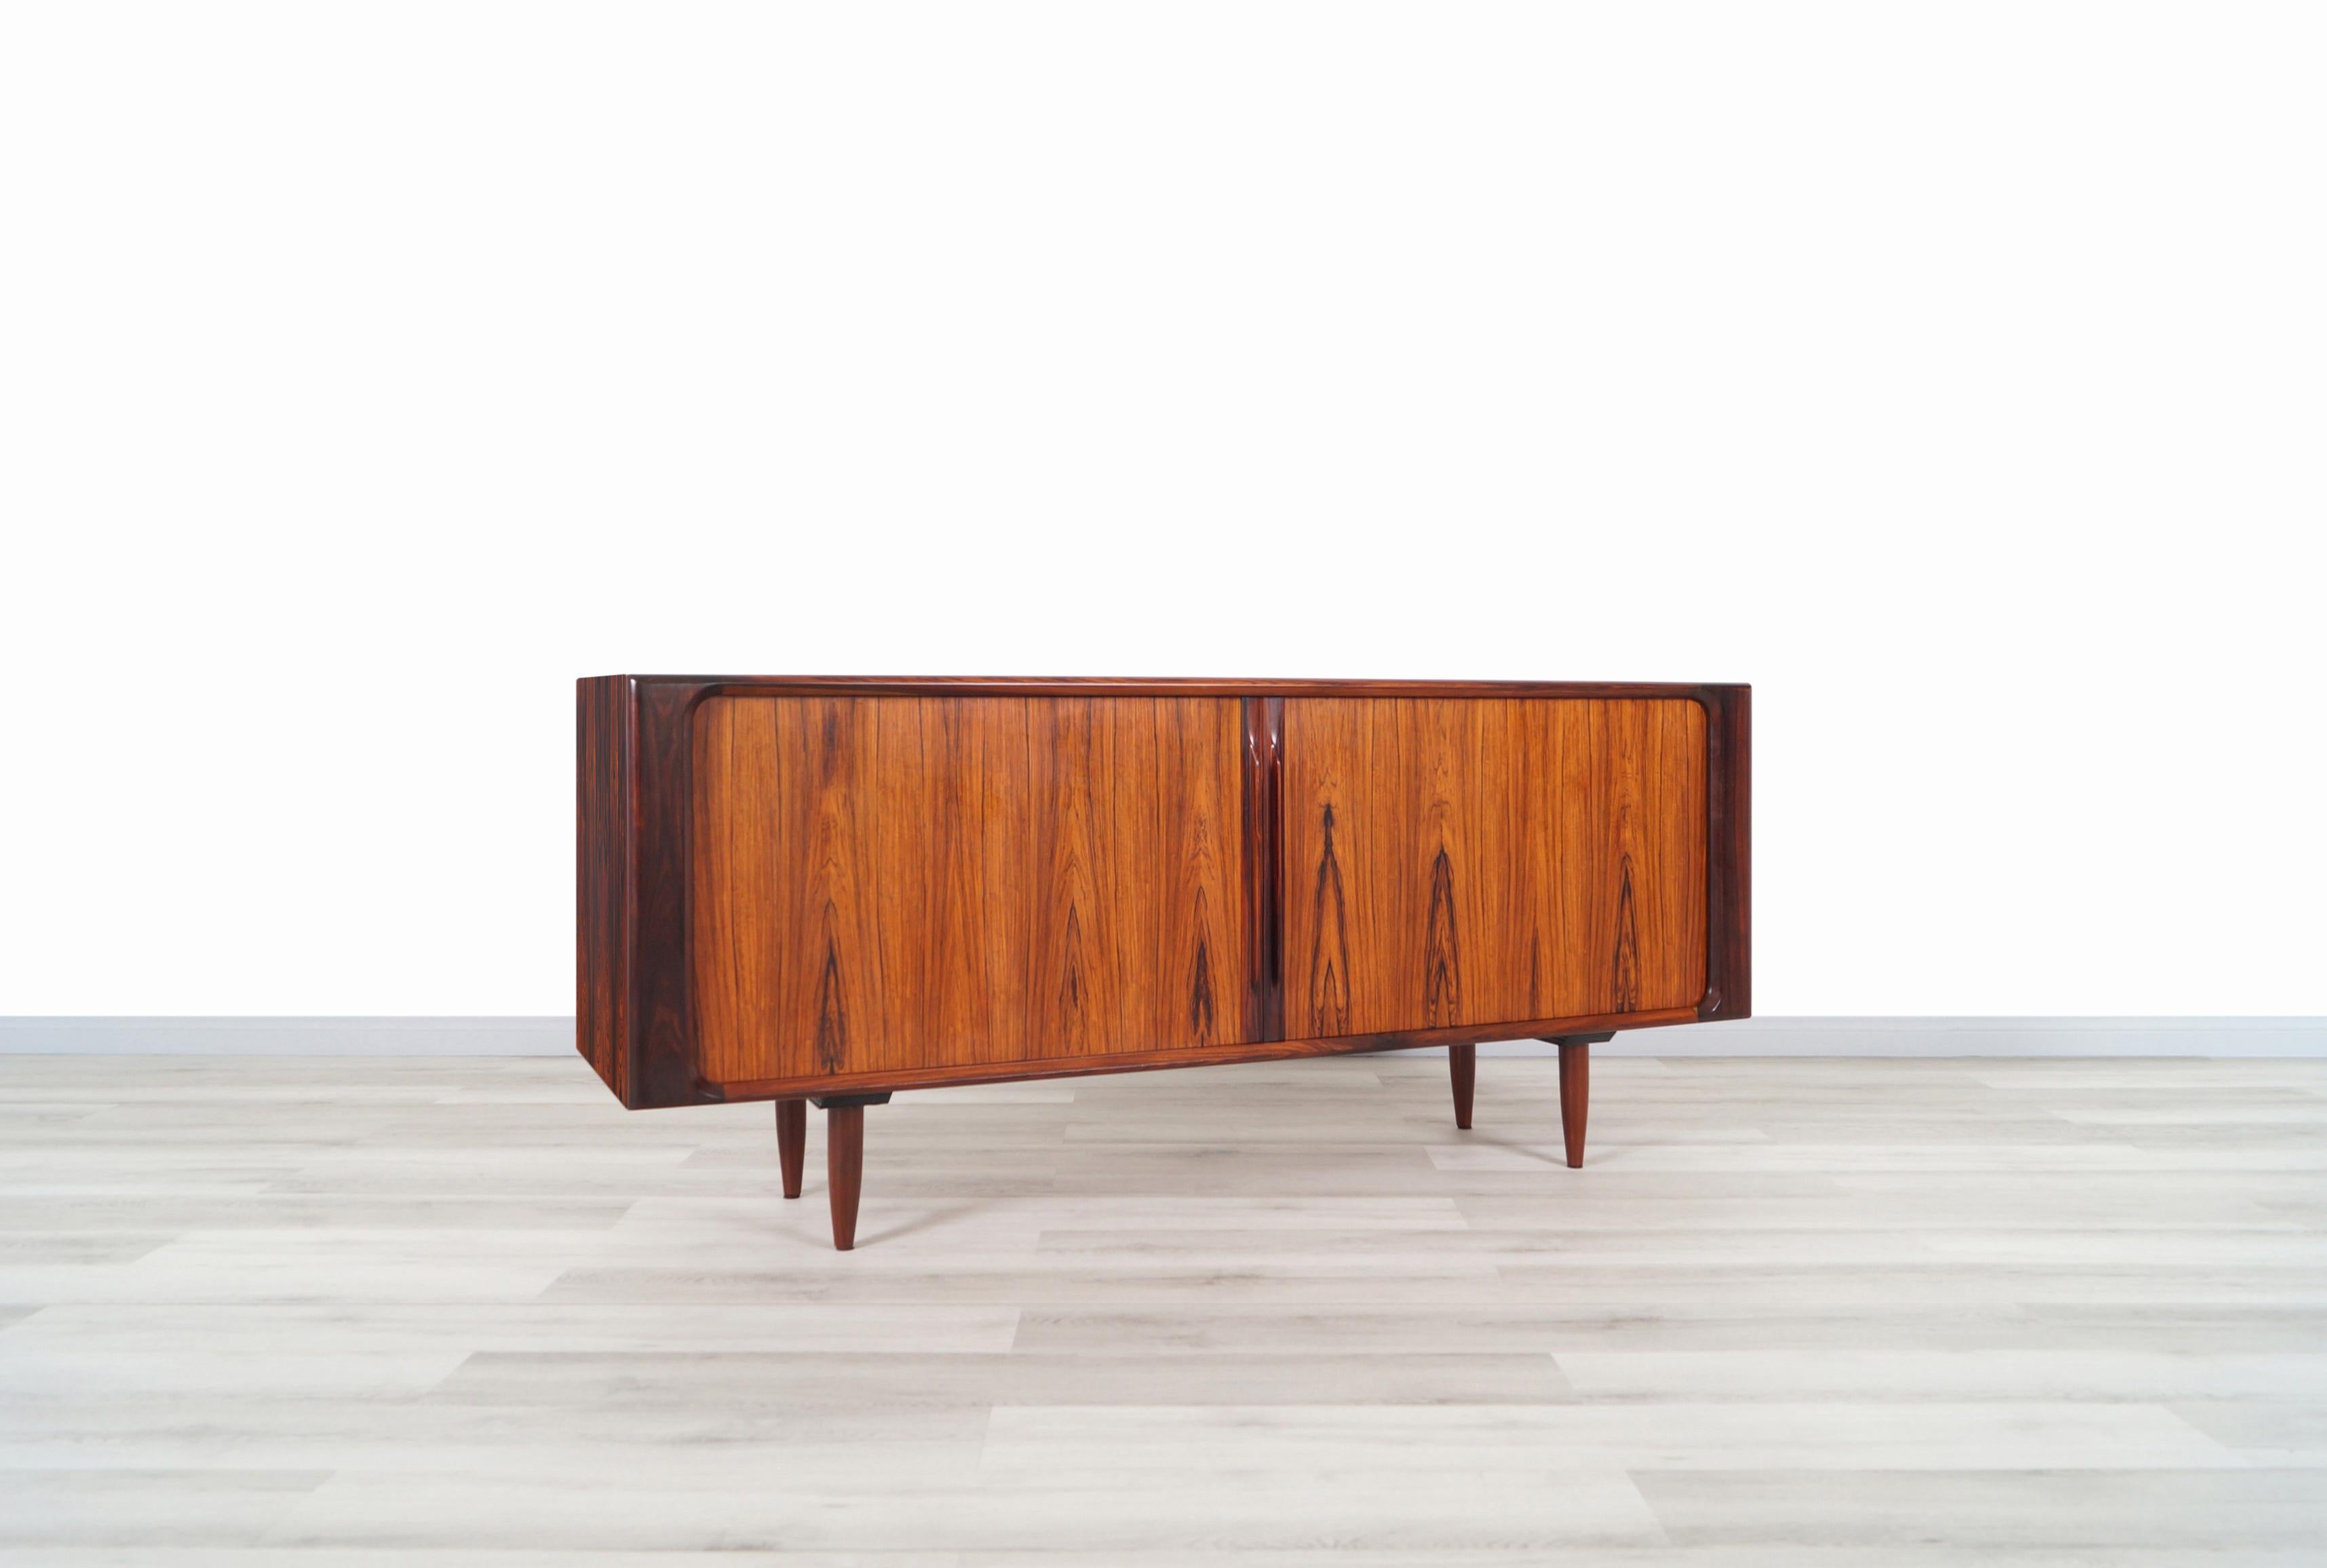 A stunning rosewood tambour doors credenza designed by Bernhard Pedersen & Son in Denmark, circa 1960s. This exceptional credenza features a well crafted Brazilian rosewood case with two tambour doors that smoothly glides open to reveal spacious